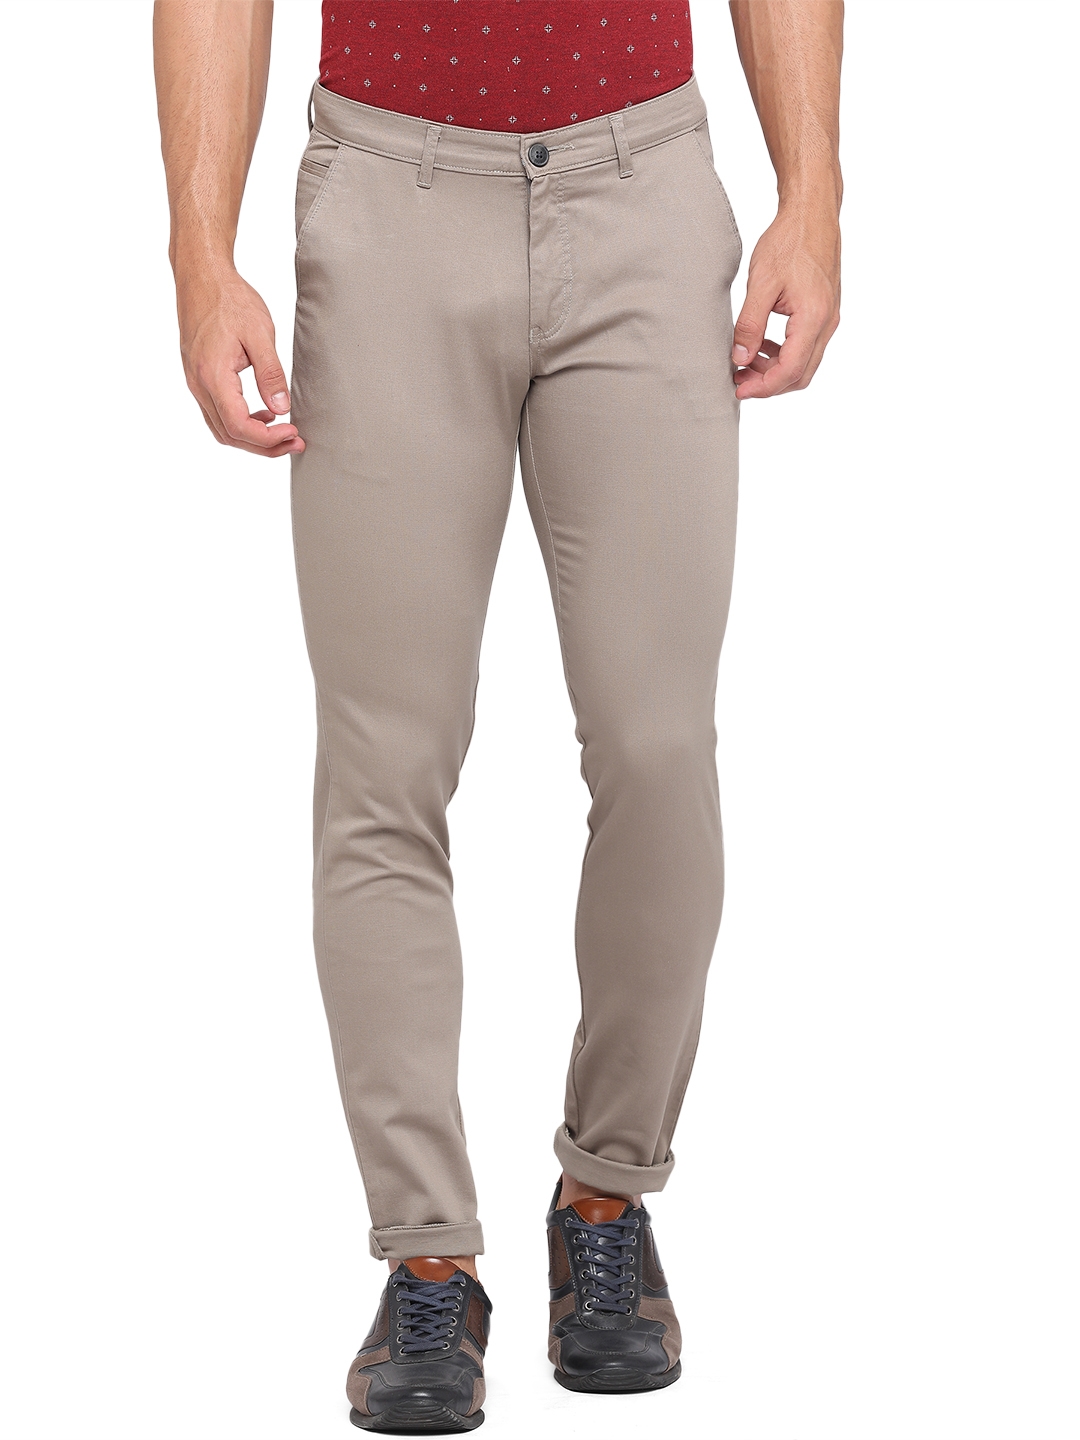 Greenfibre | Grey Solid Neo Fit Casual Trouser | Greenfibre